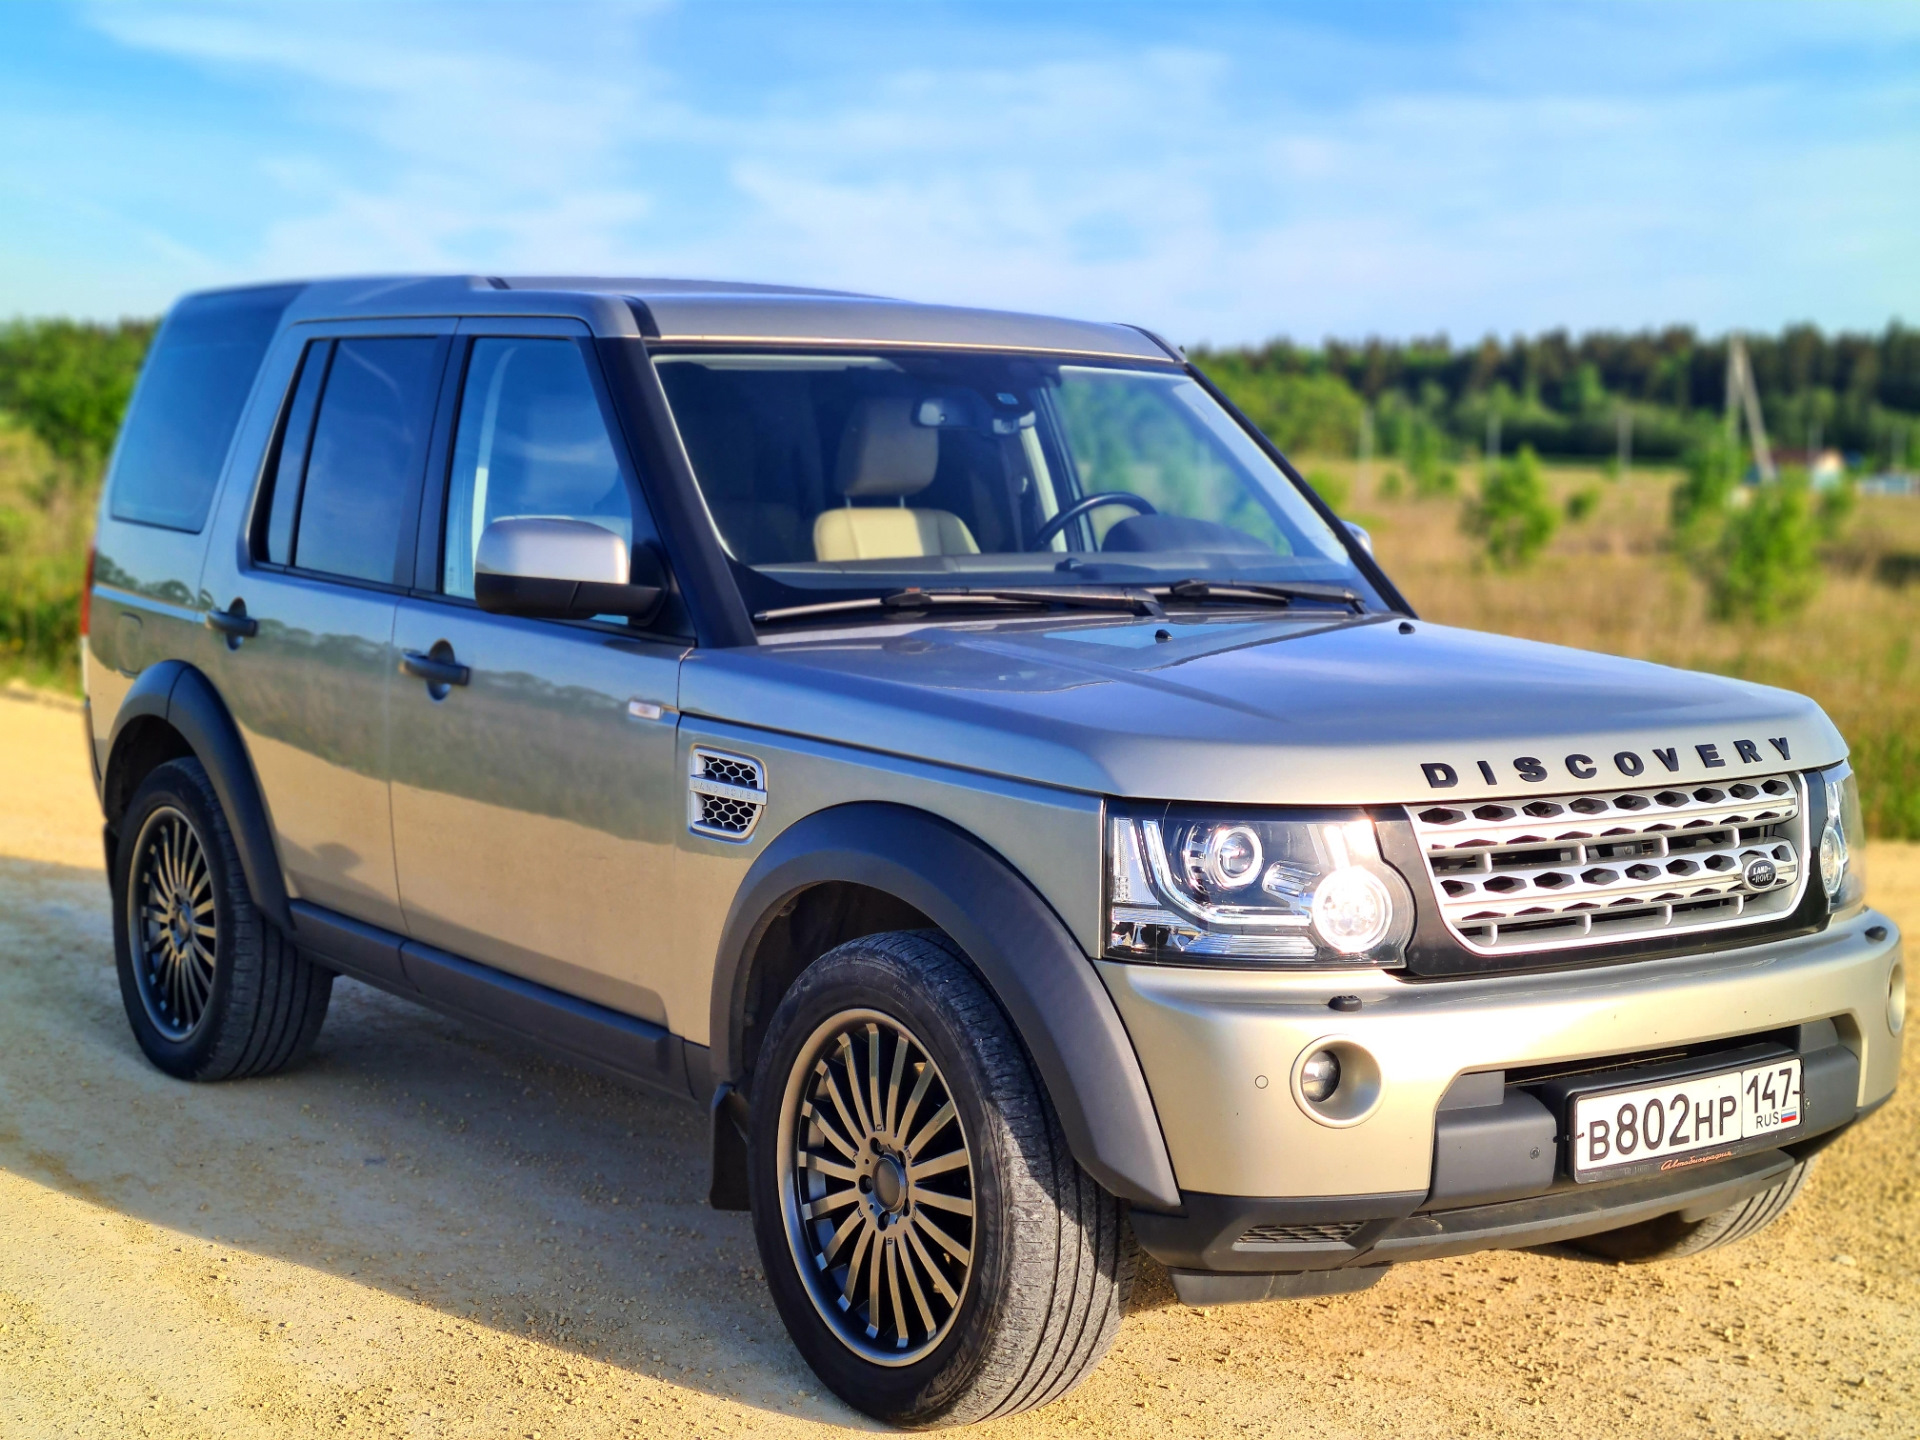 Дискавери 12. Land Rover Discovery 4. Land Rover Discovery 2. Land Rover Discovery 3. Land Rover Discovery 4 2016.